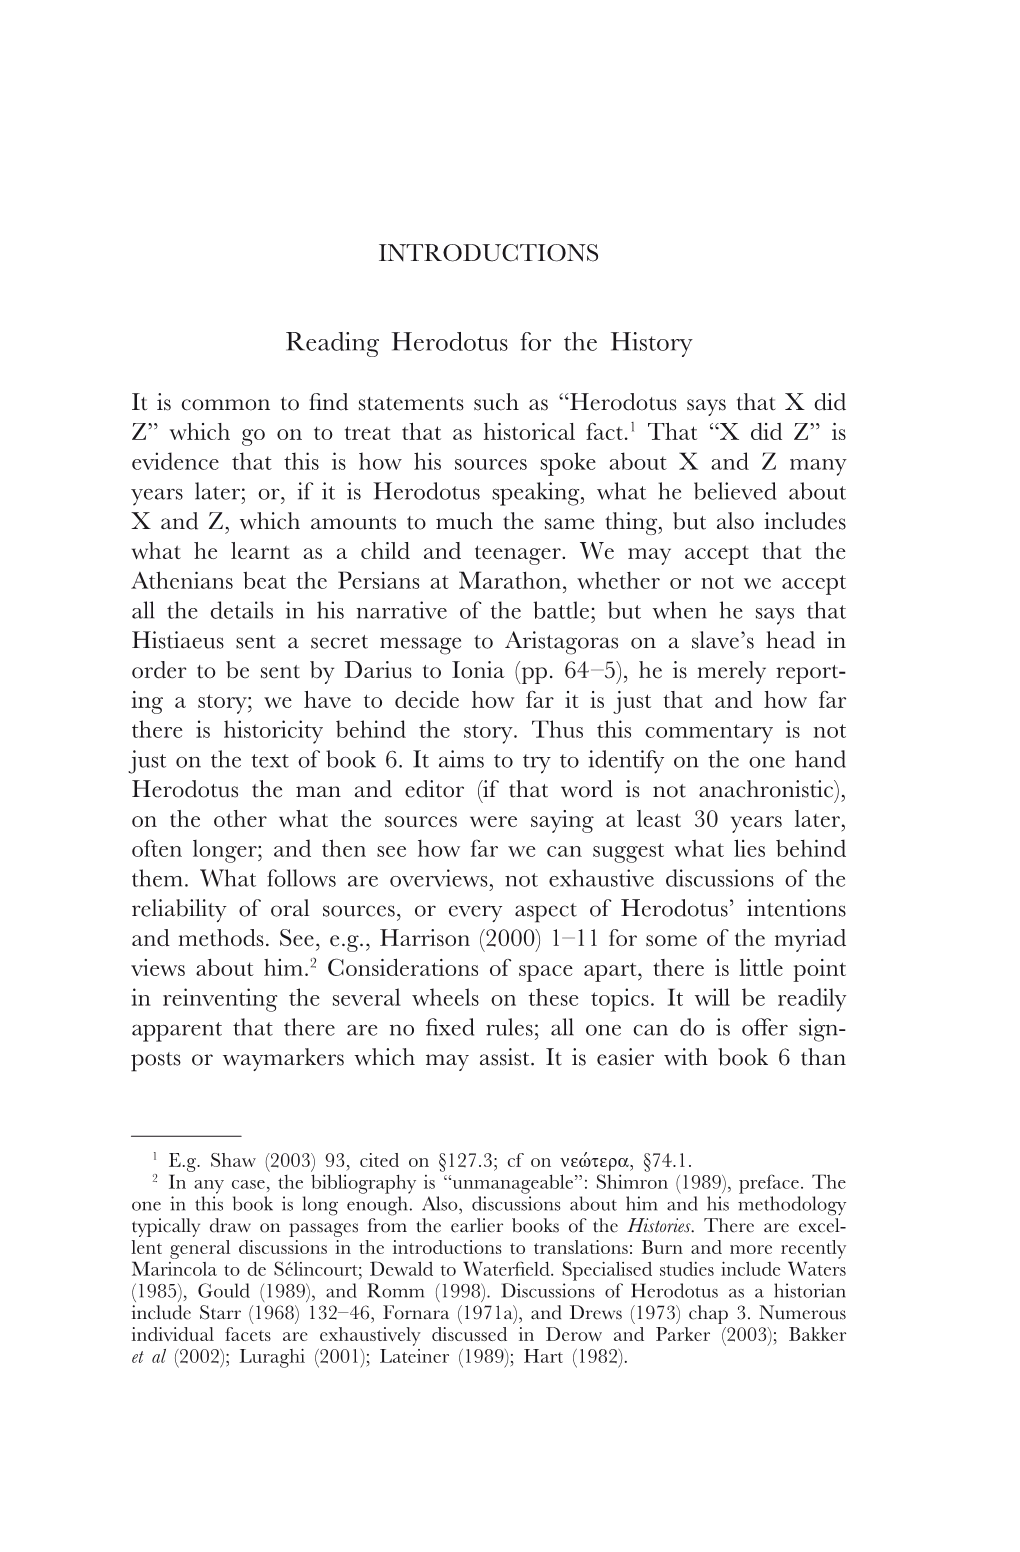 Reading Herodotus for the History